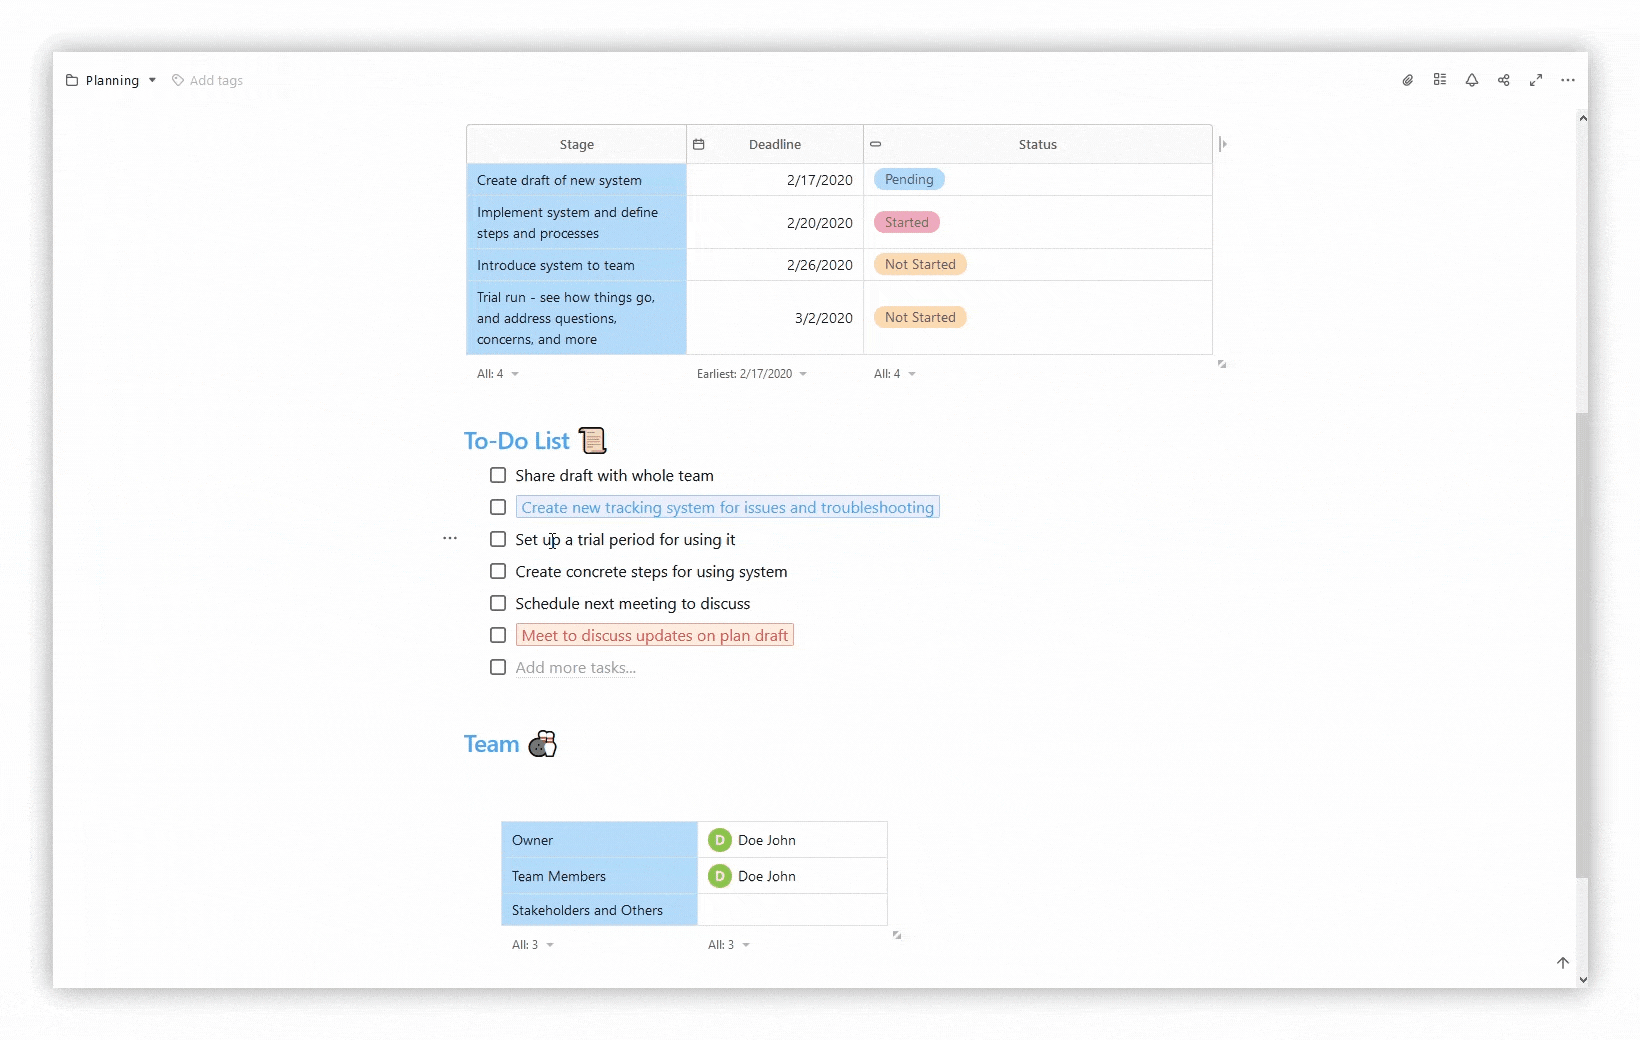 Can tasks be swapped?